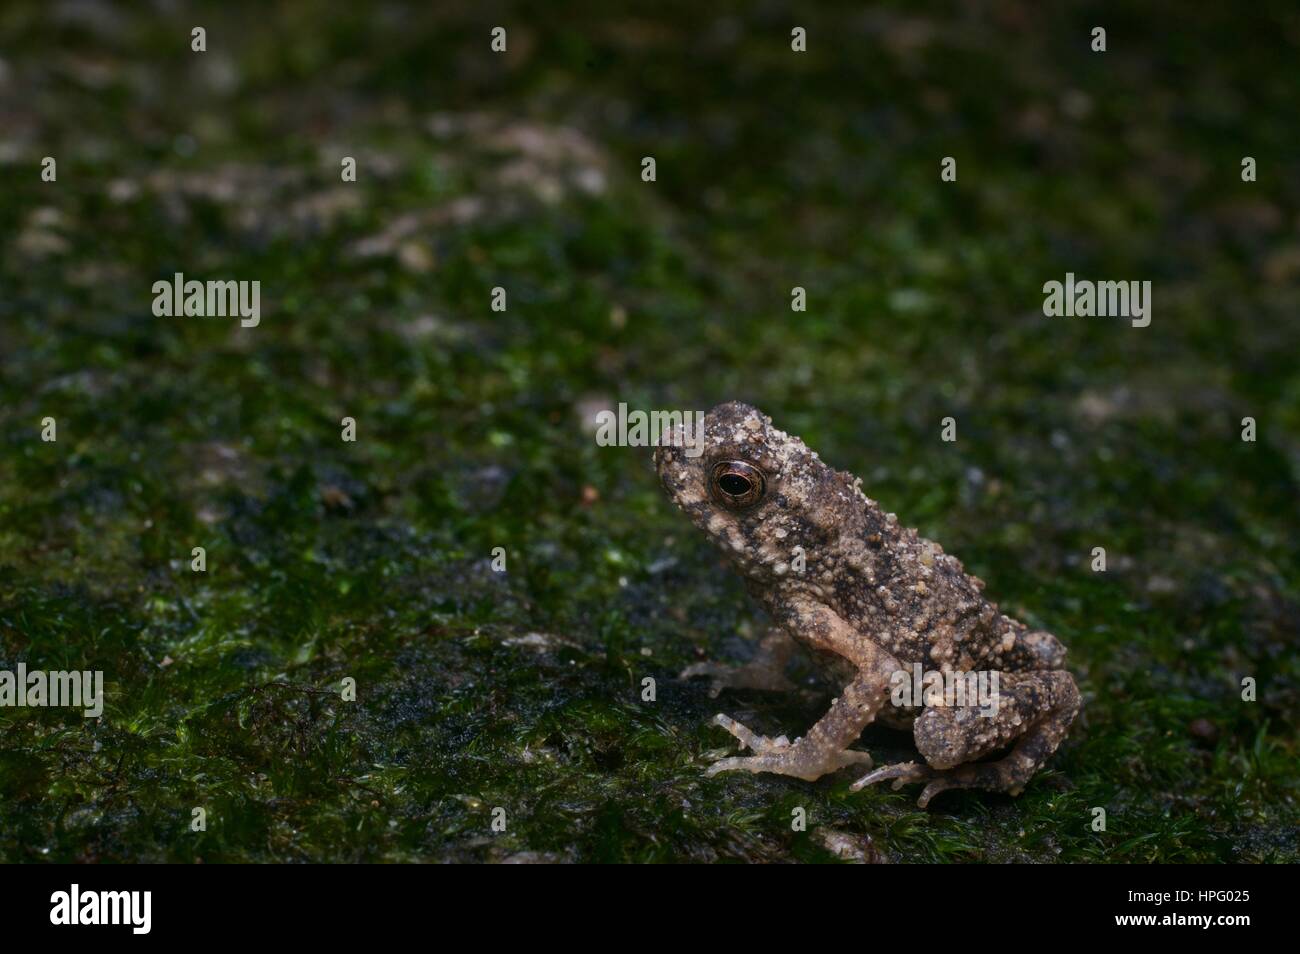 A young River Toad (Phrynoidis aspera) on a mossy boulder in Batang Kali, Selangor, Malaysia Stock Photo